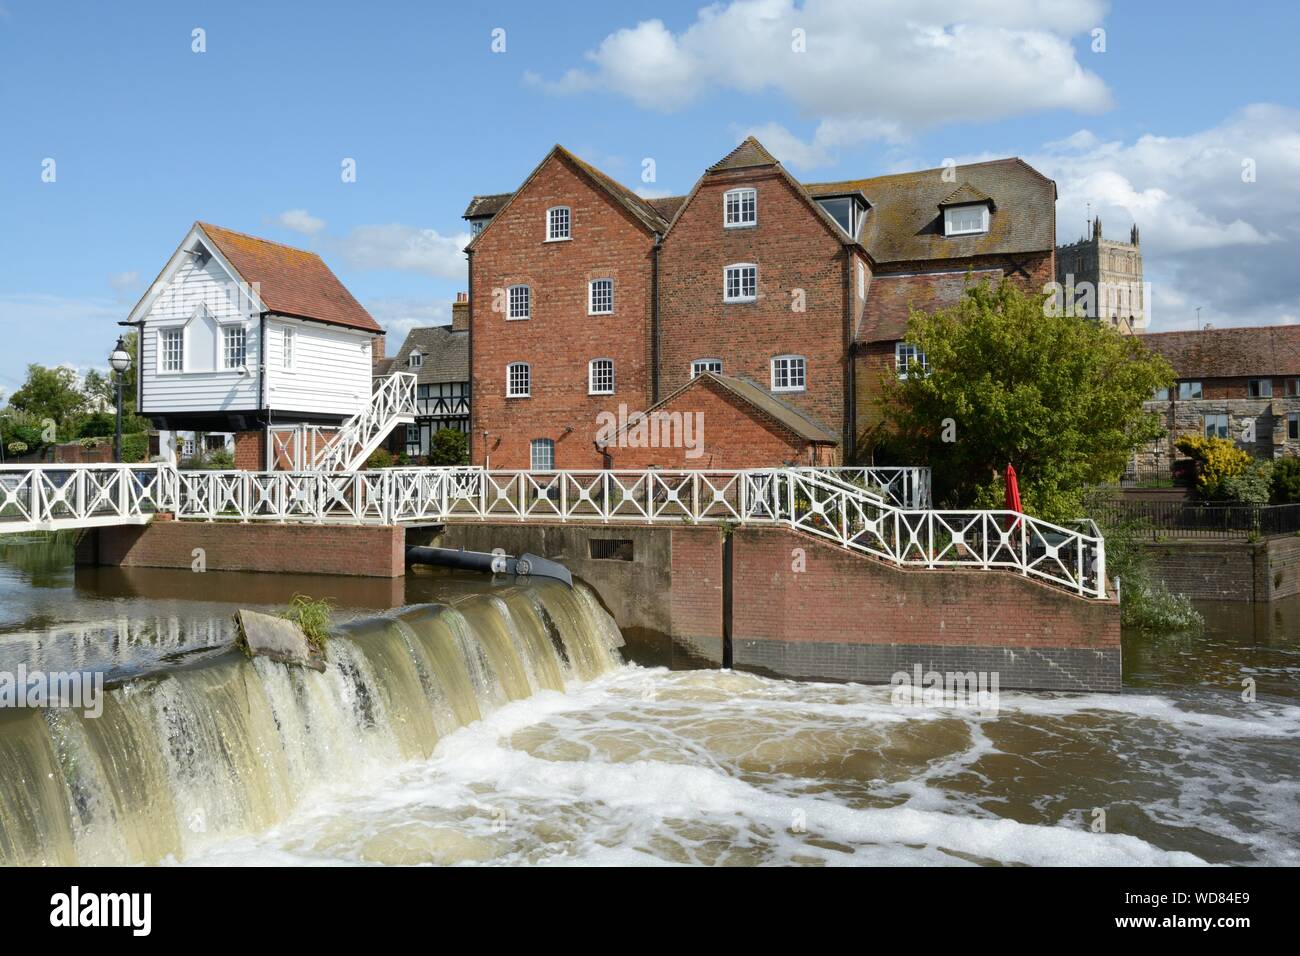 Healings flour mill or Burough Mill  and weir on River Avon Tewkesbury Gloucestershire England UK Stock Photo